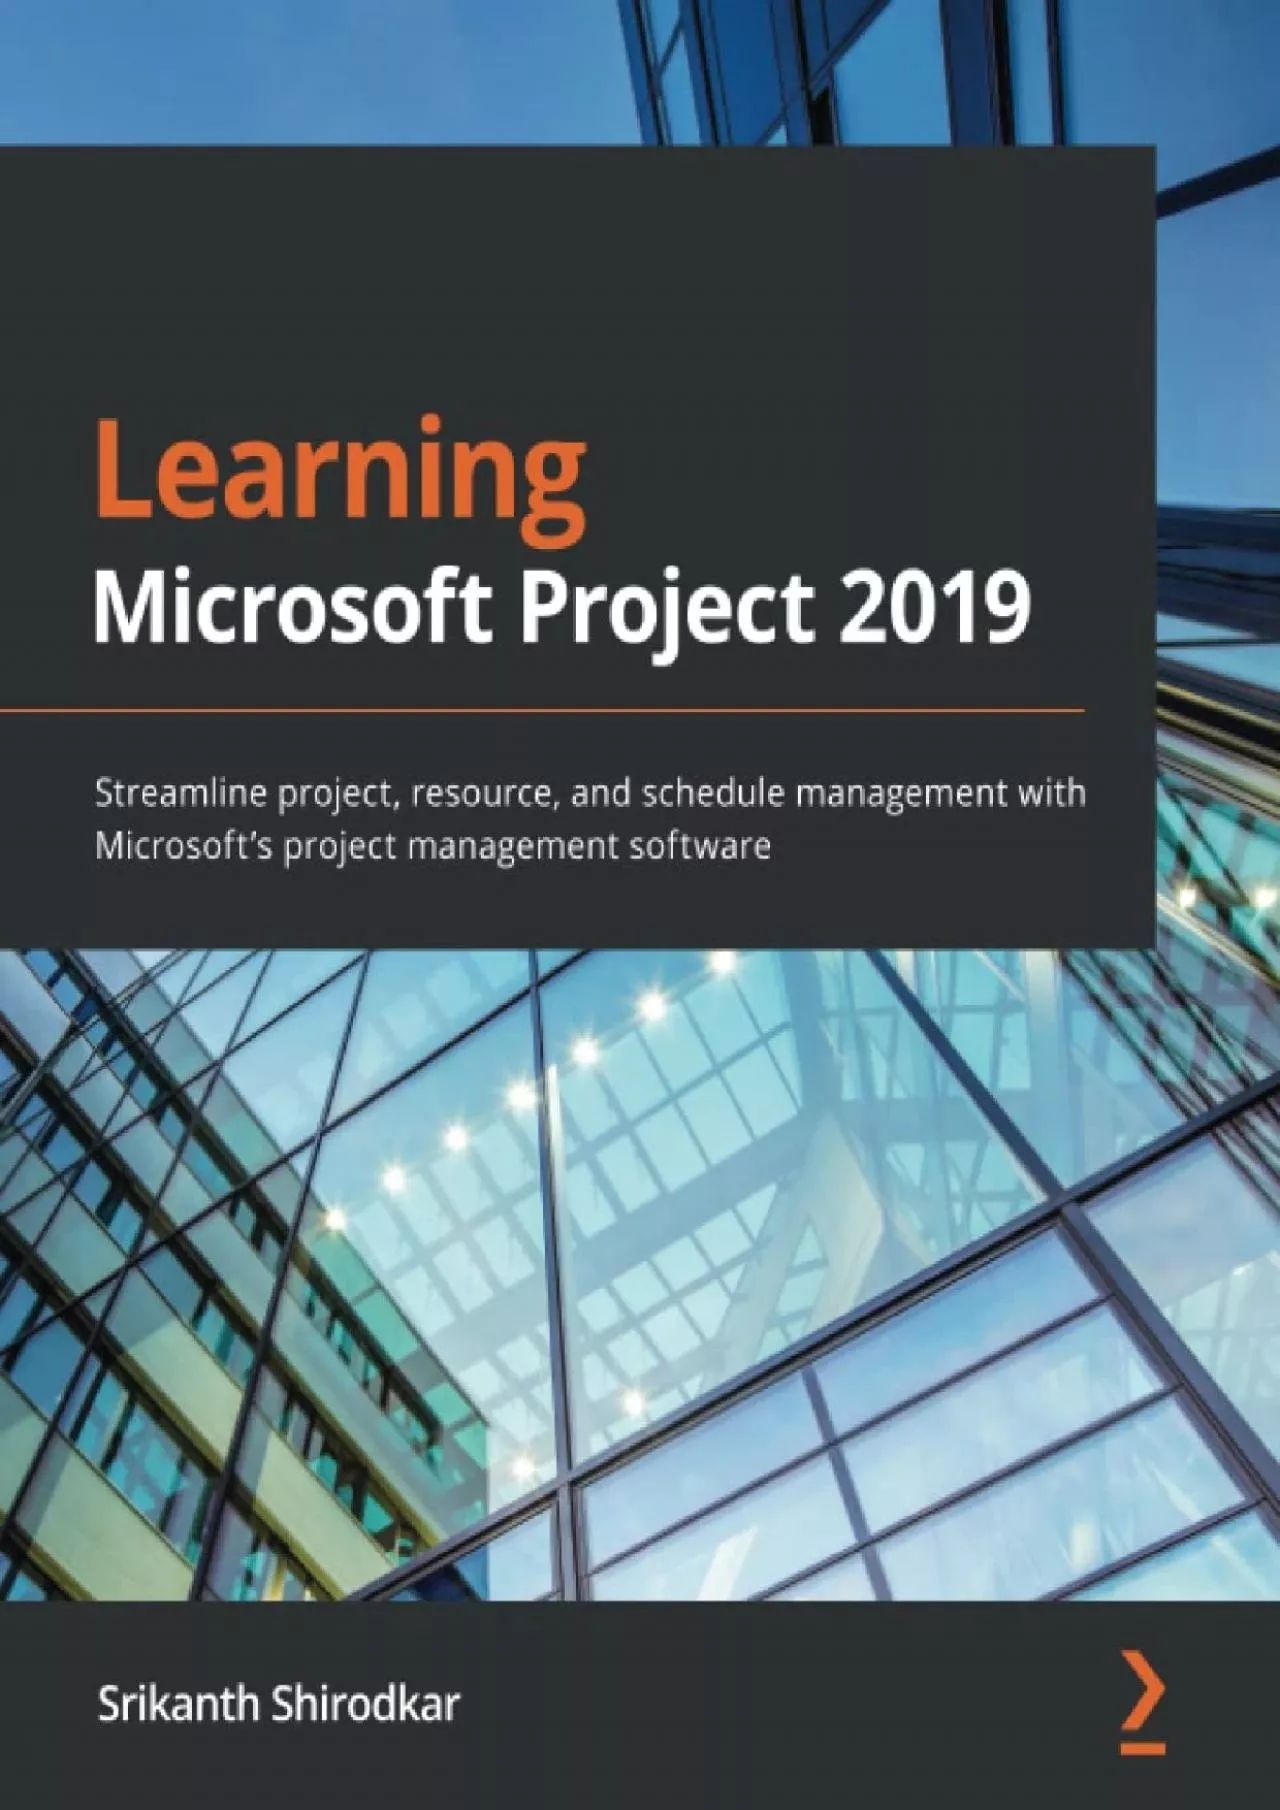 Learning Microsoft Project 2019: Streamline project, resource, and schedule management